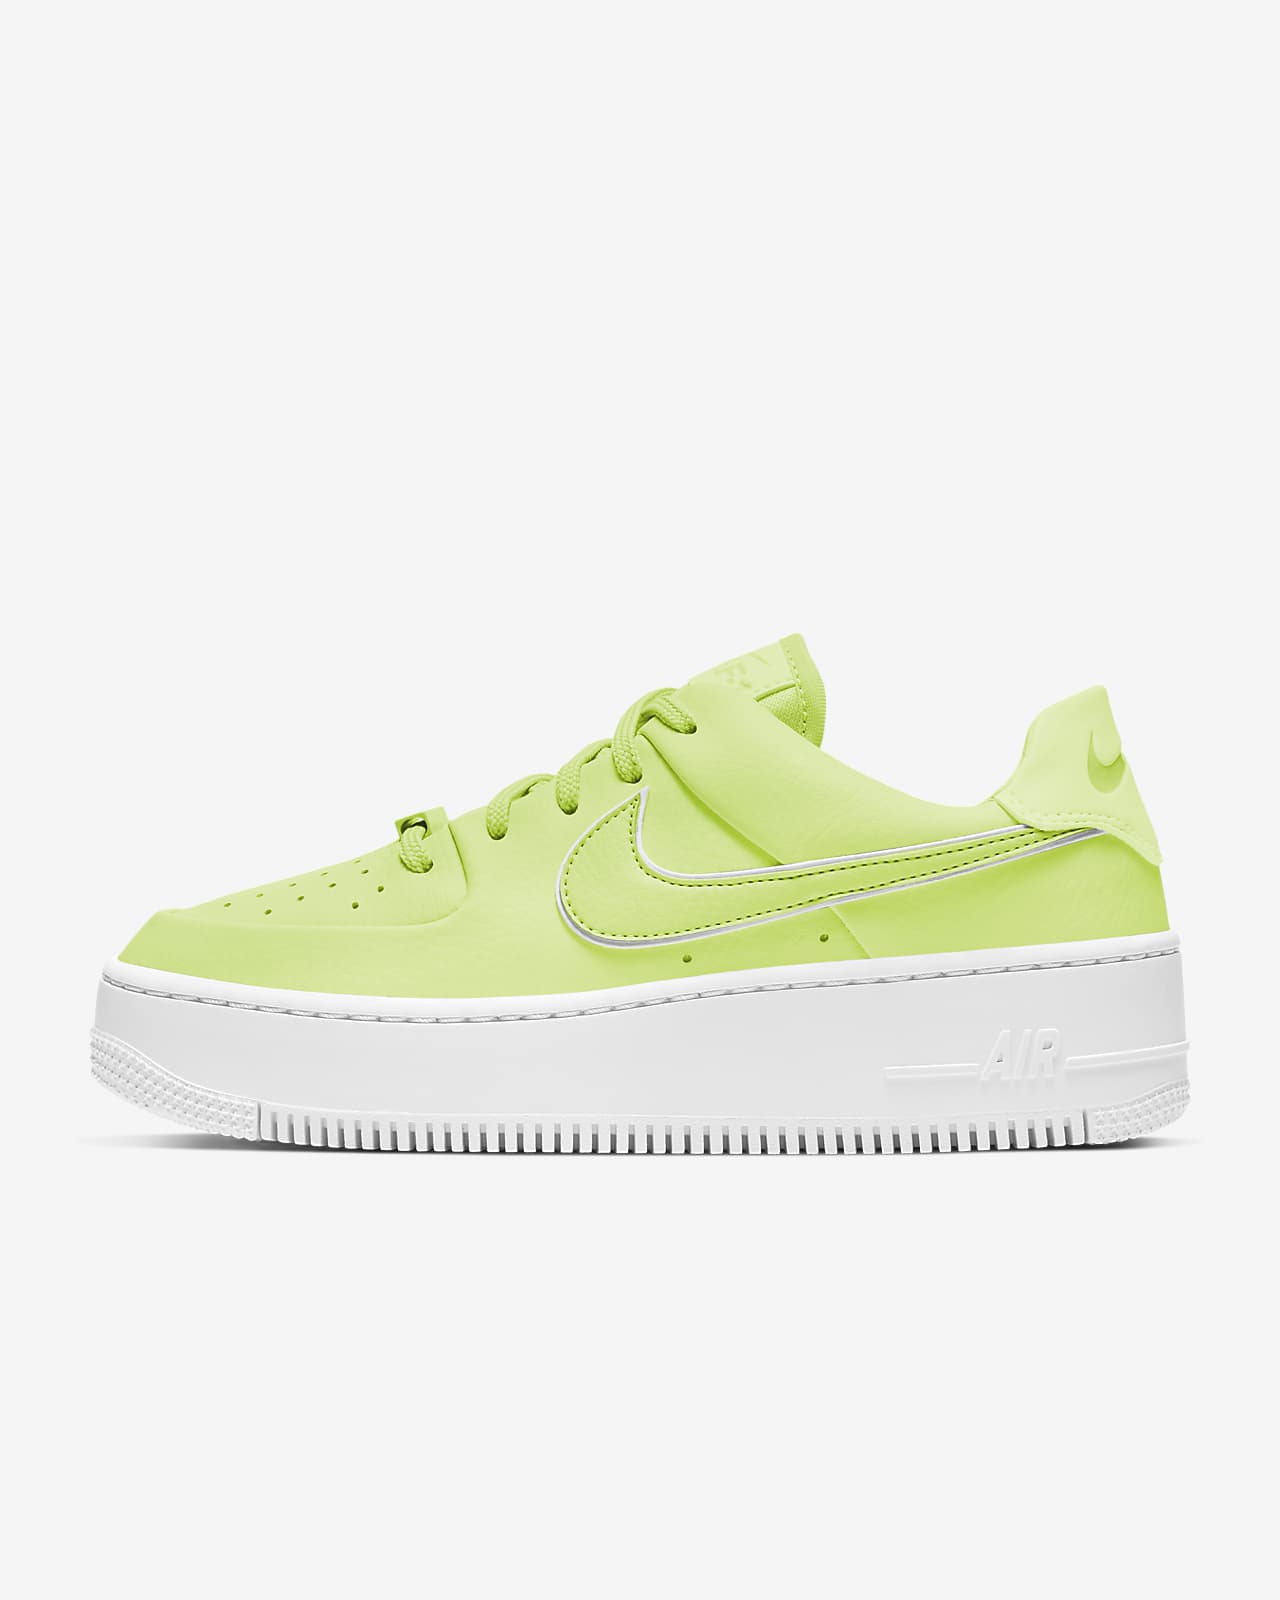 nike white air force 1 sage low sneakers